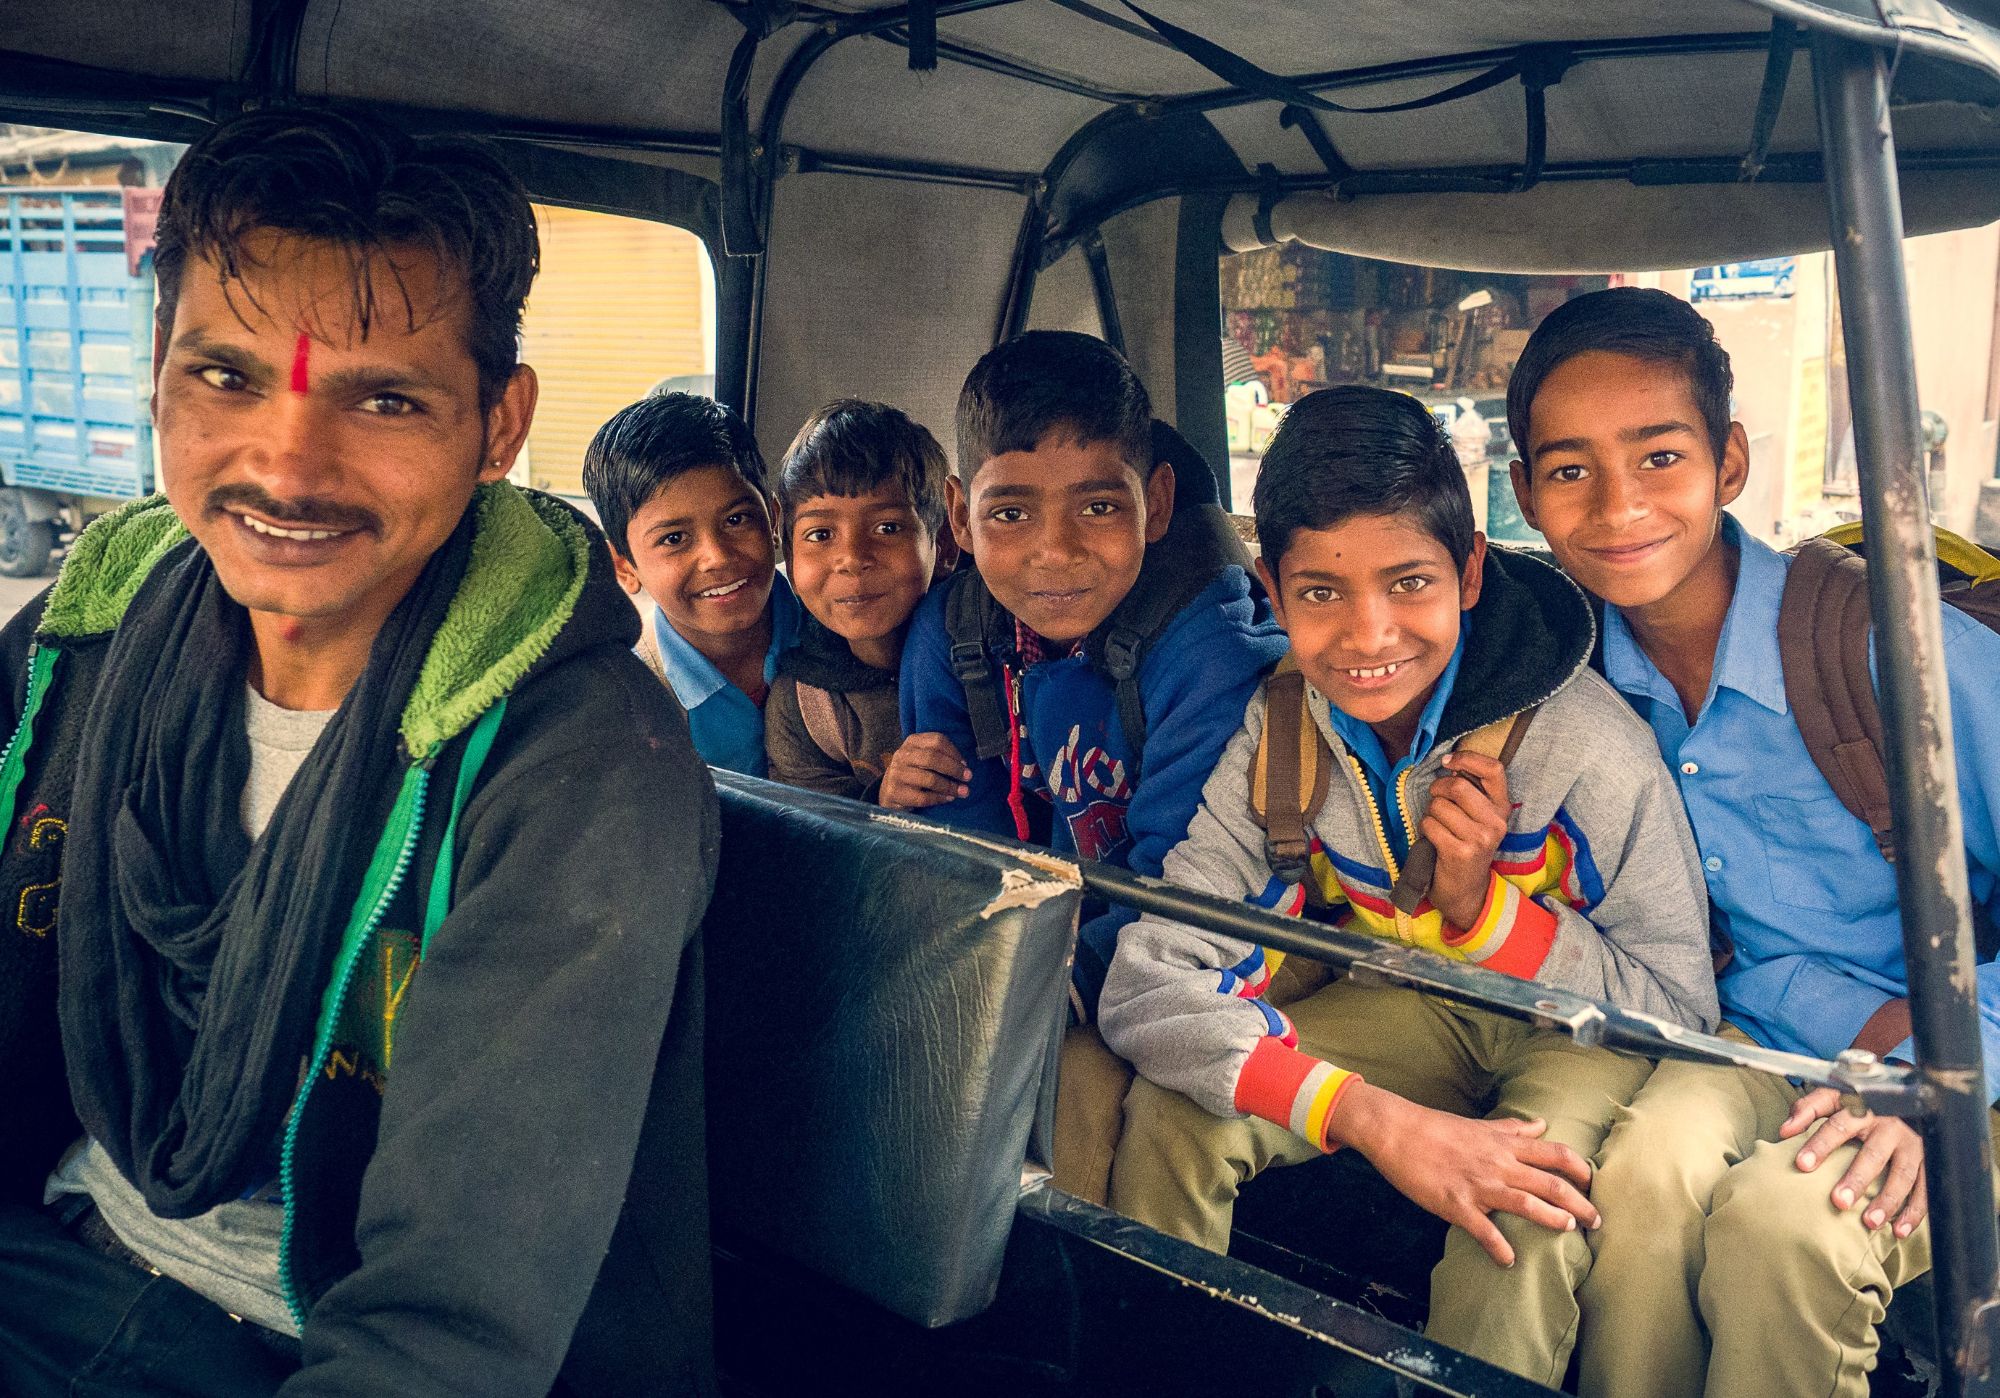 Driver and young kids smiling in transport in India.